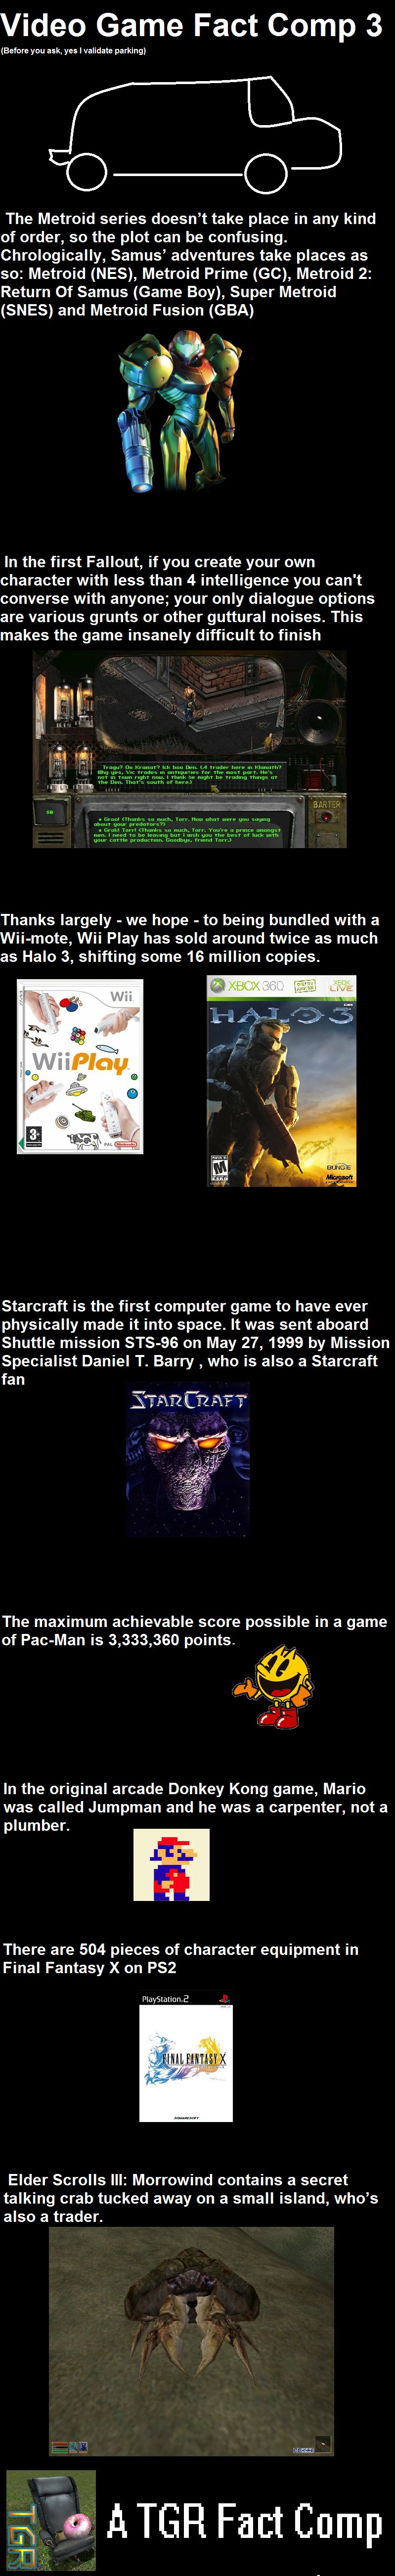 Video Game Fact Comp 3